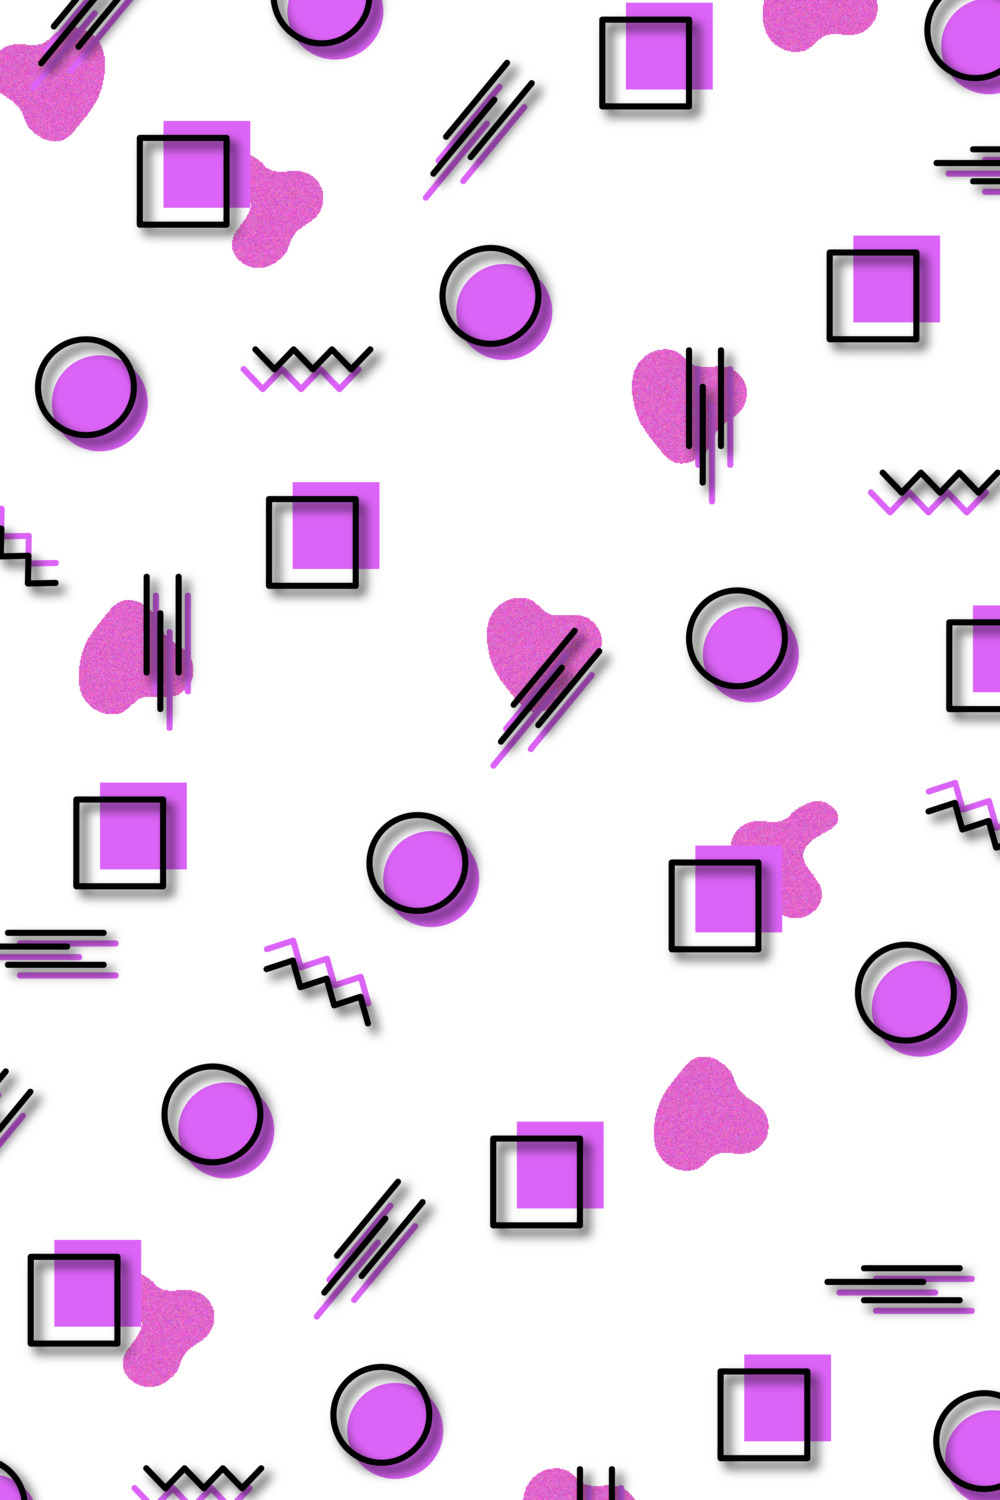 Shapes pinterest preview image.